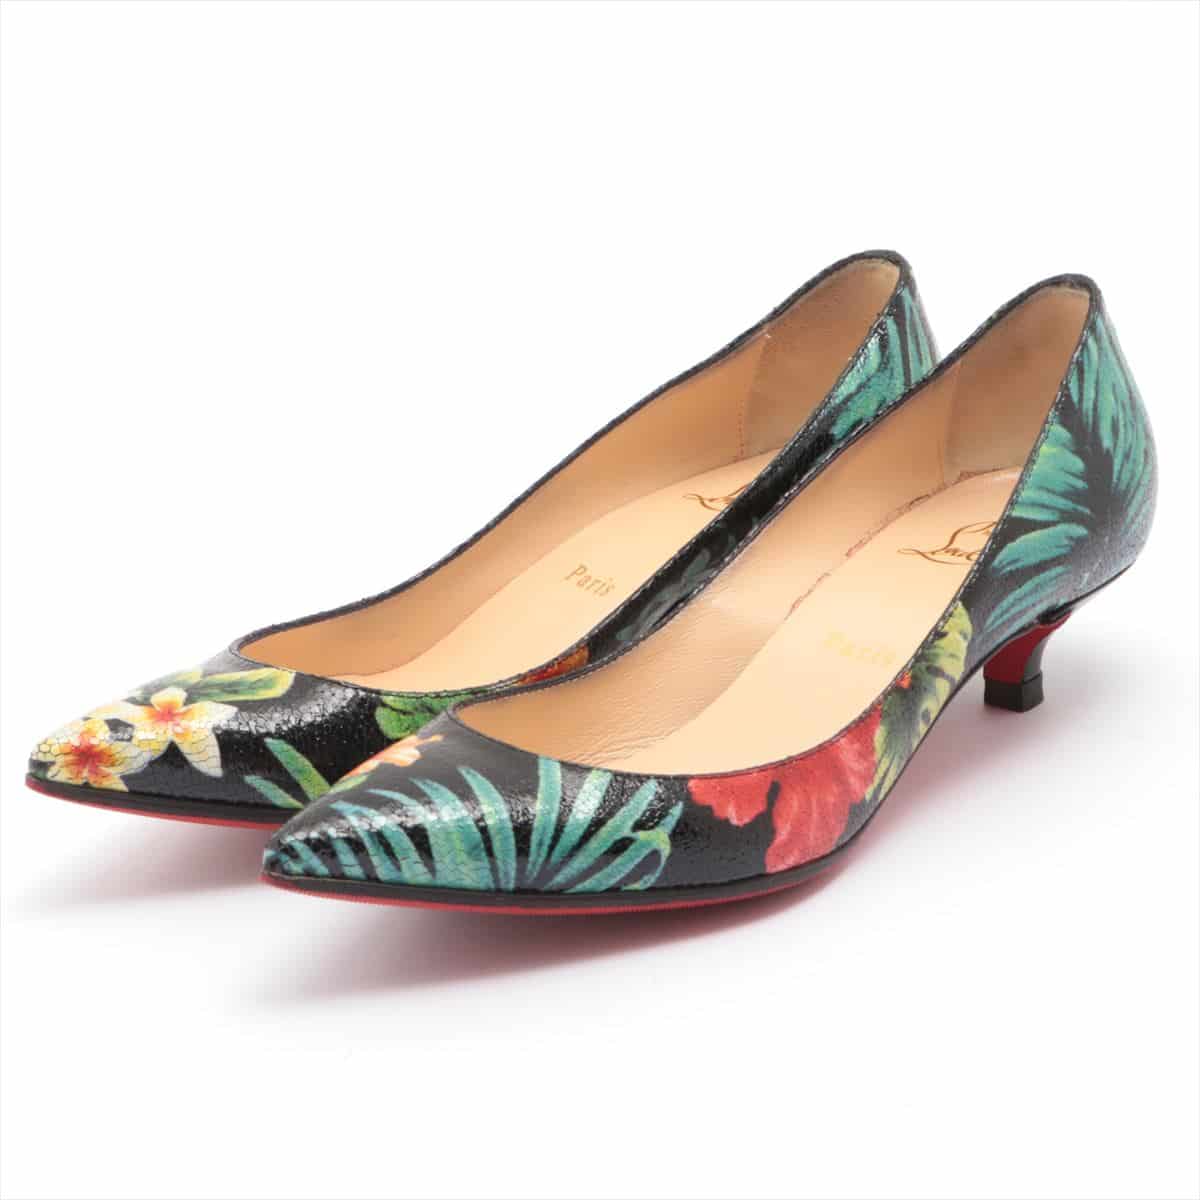 Christian Louboutin Leather Pumps 37 Ladies' Multicolor Resoled floral